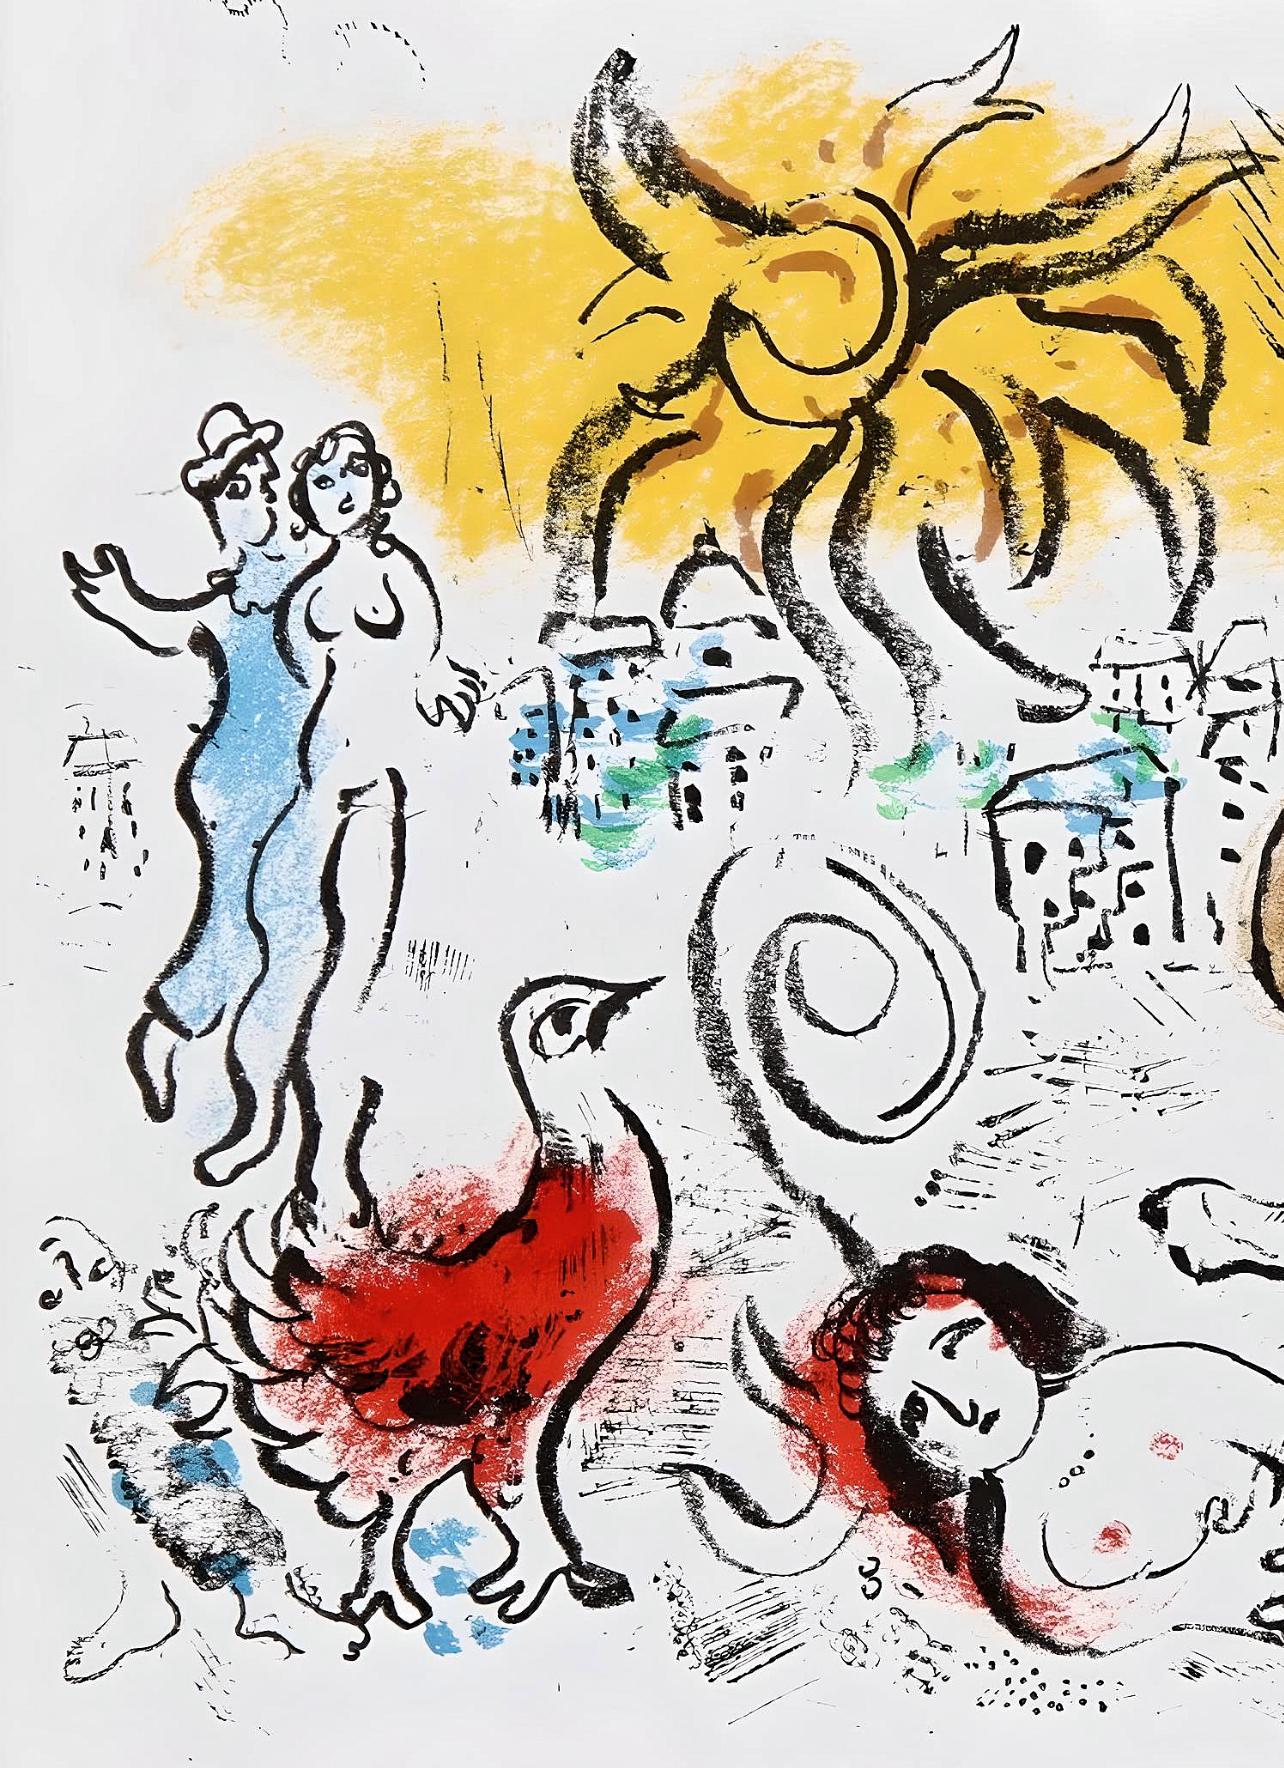 Original Edition Lithograph on wove paper. Inscription: unsigned and unnumbered, as issued. Excellent Condition with centerfold, aa issued; never framed or matted. Notes: Extracted from review XXe Siècle', Chagall Monumental. 1973. Published by XXe